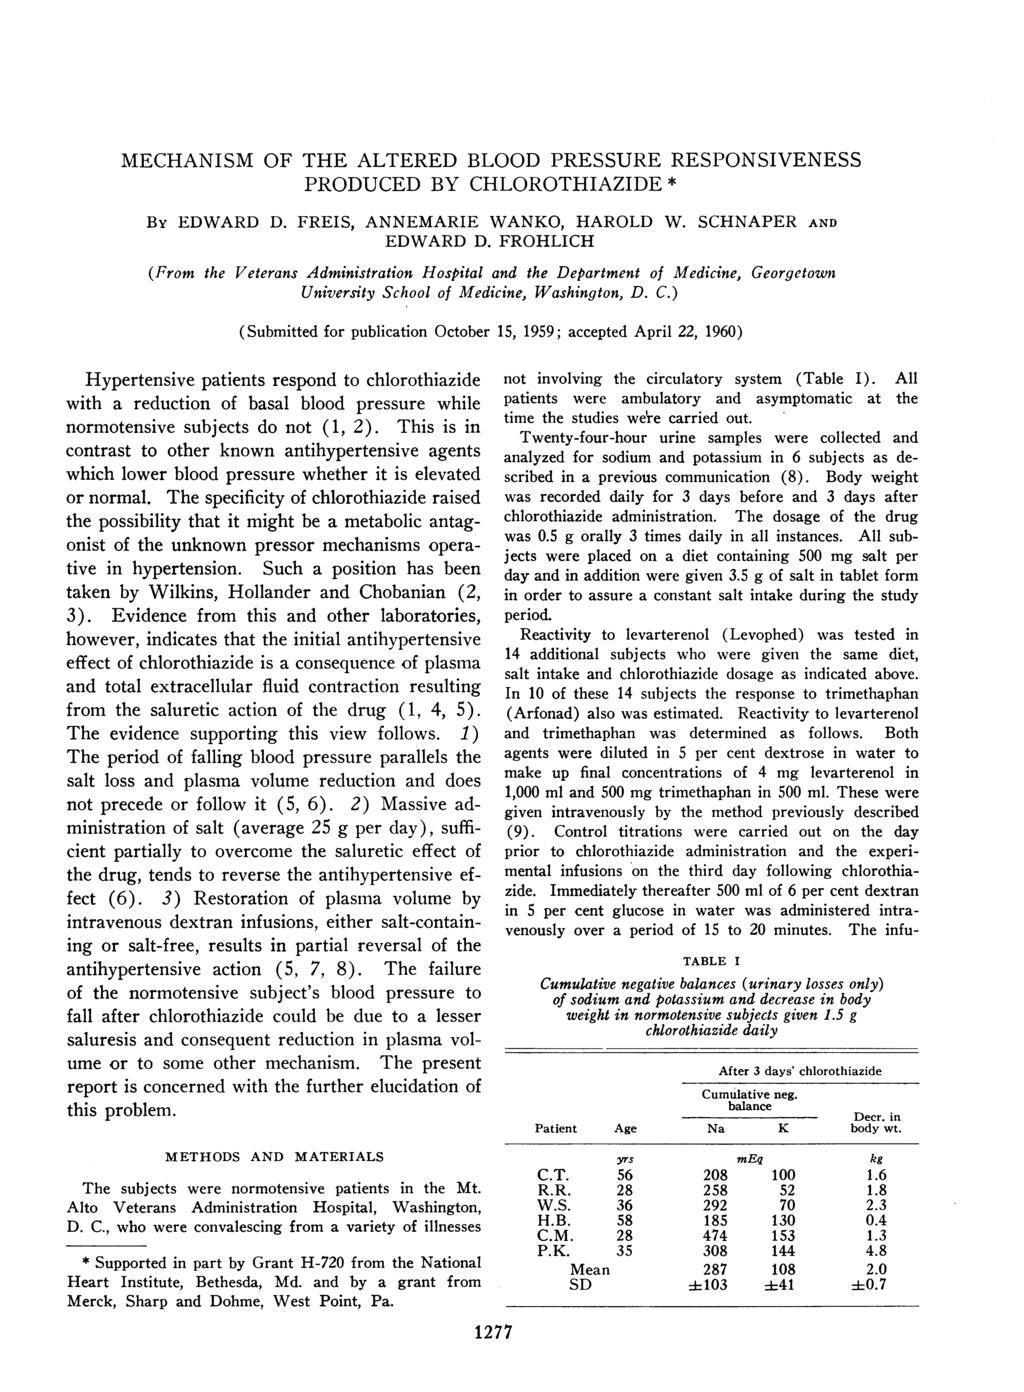 MECHANISM OF THE ALTERED BLOOD PRESSURE RESPONSIVENESS PRODUCED BY CHLOROTHIAZIDE * By EDWARD D. FREIS, ANNEMARIE WANKO, HAROLD W. SCHNAPER AND EDWARD D.